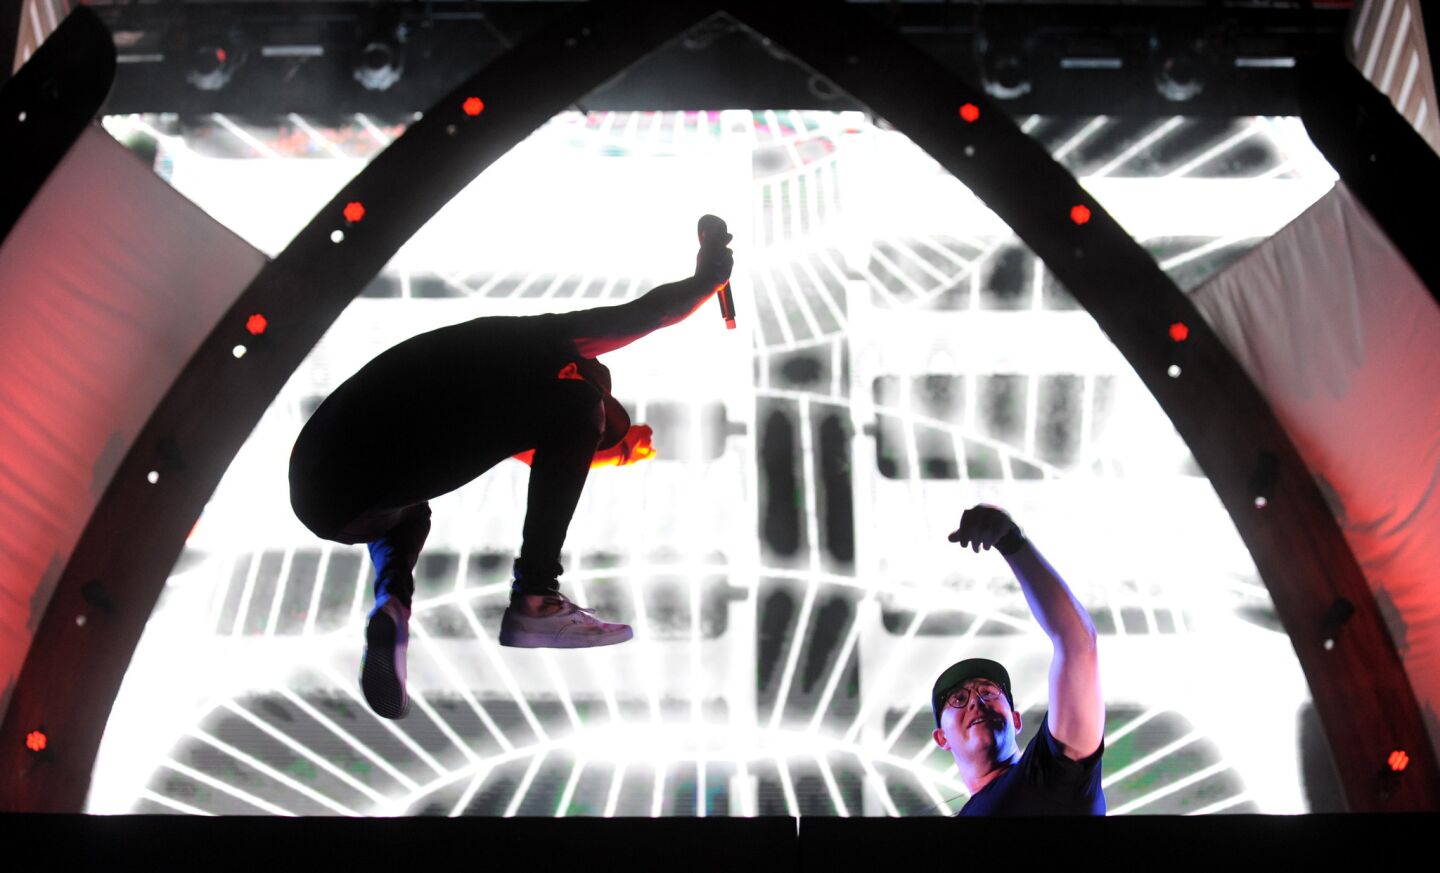 Members of SNBRN perform at the Cosmic Meadow stage during the Electric Daisy Carnival in Las Vegas on June 17.